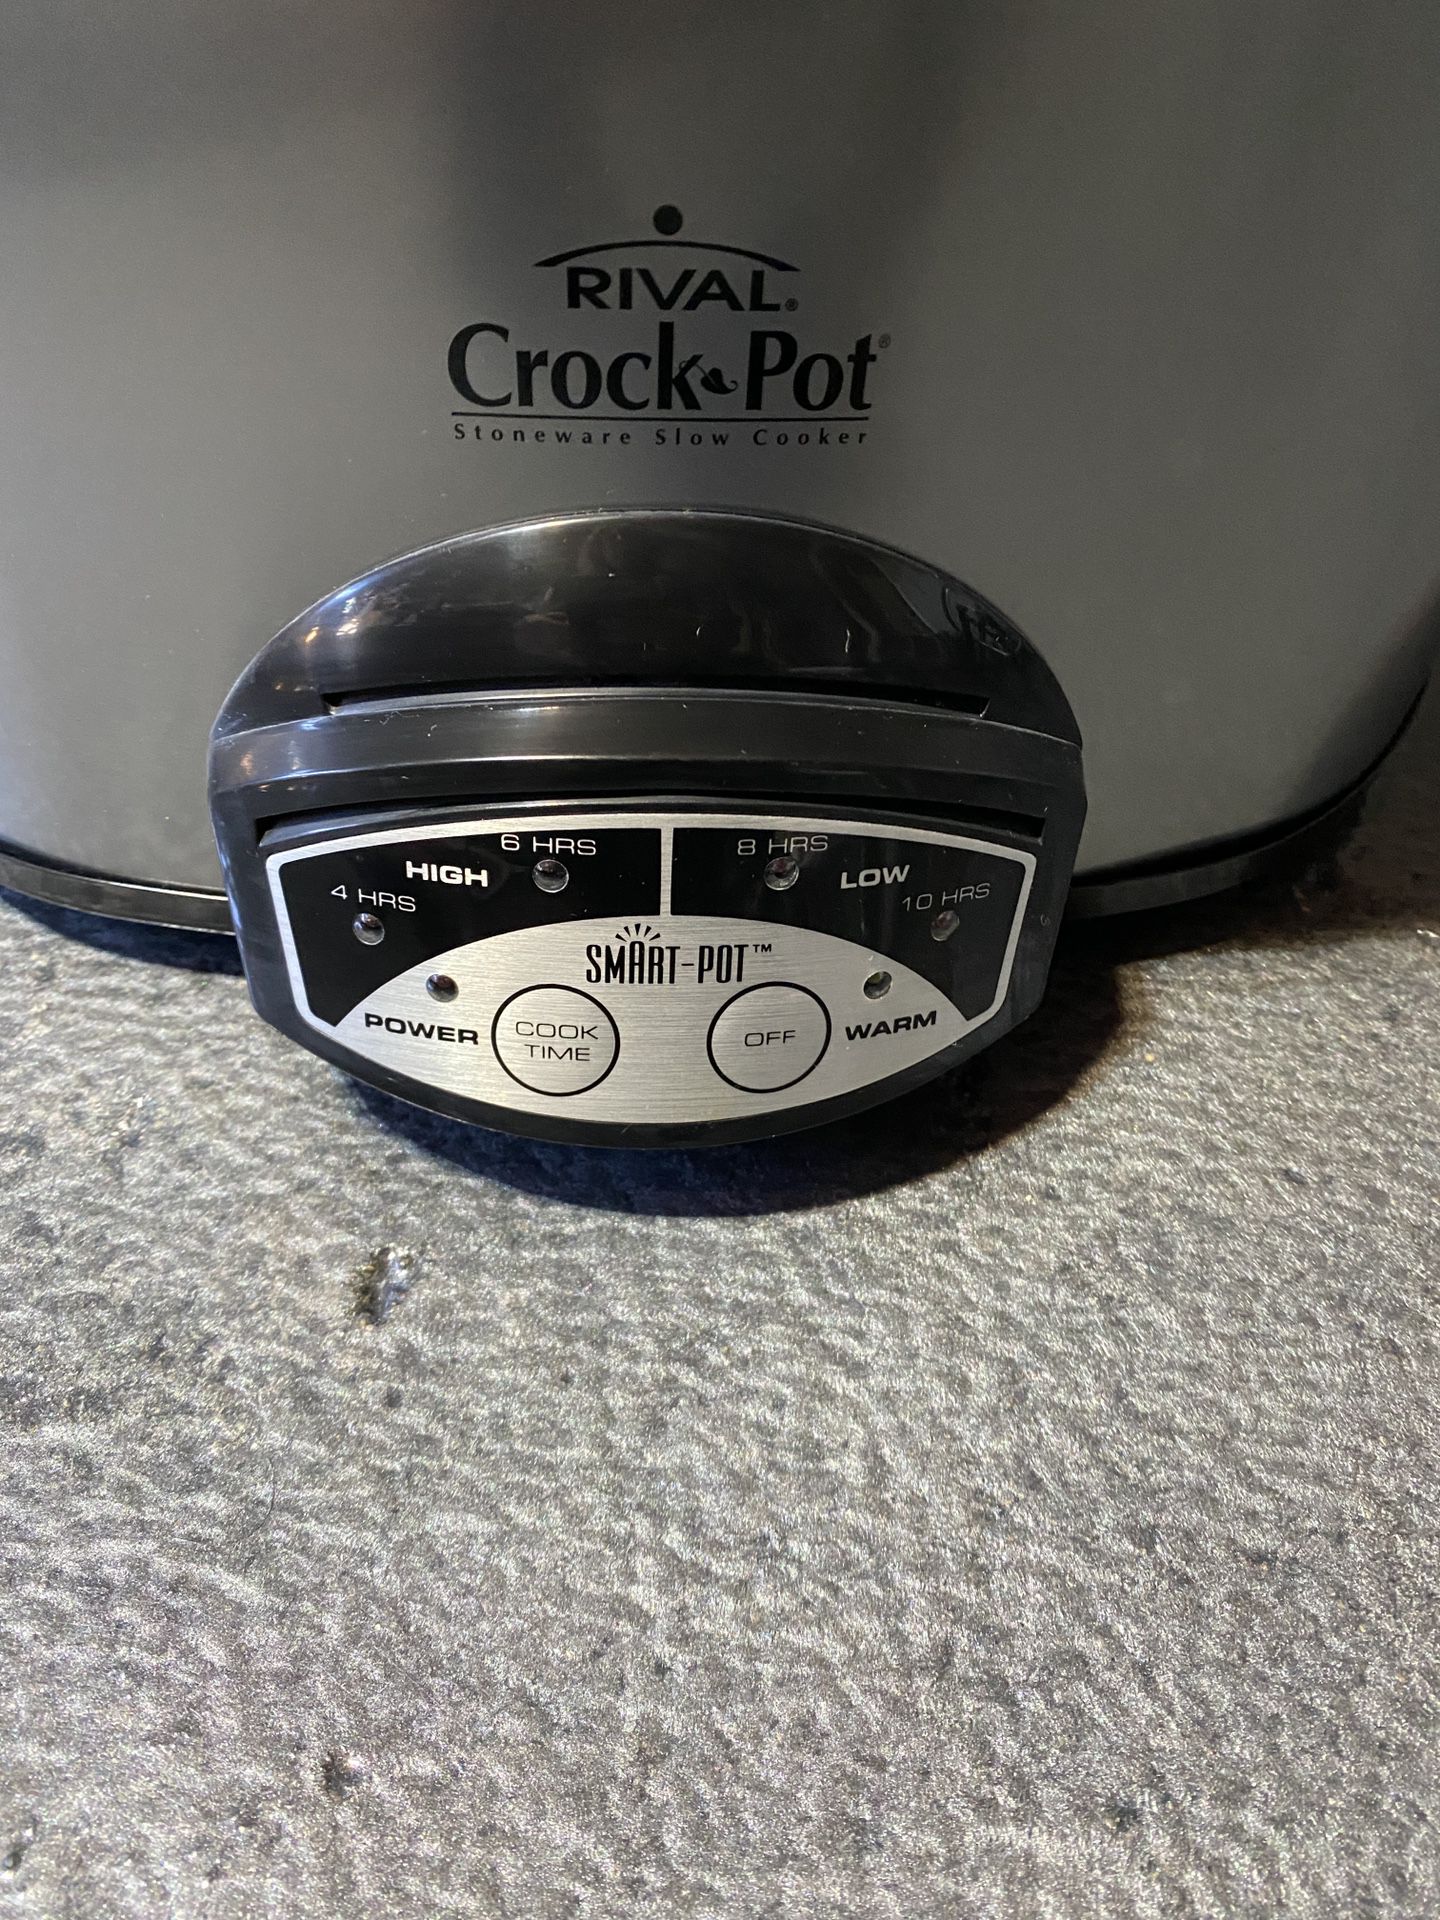 WiFi enabled 6 quart slow cooker New for Sale in Miramar, FL - OfferUp